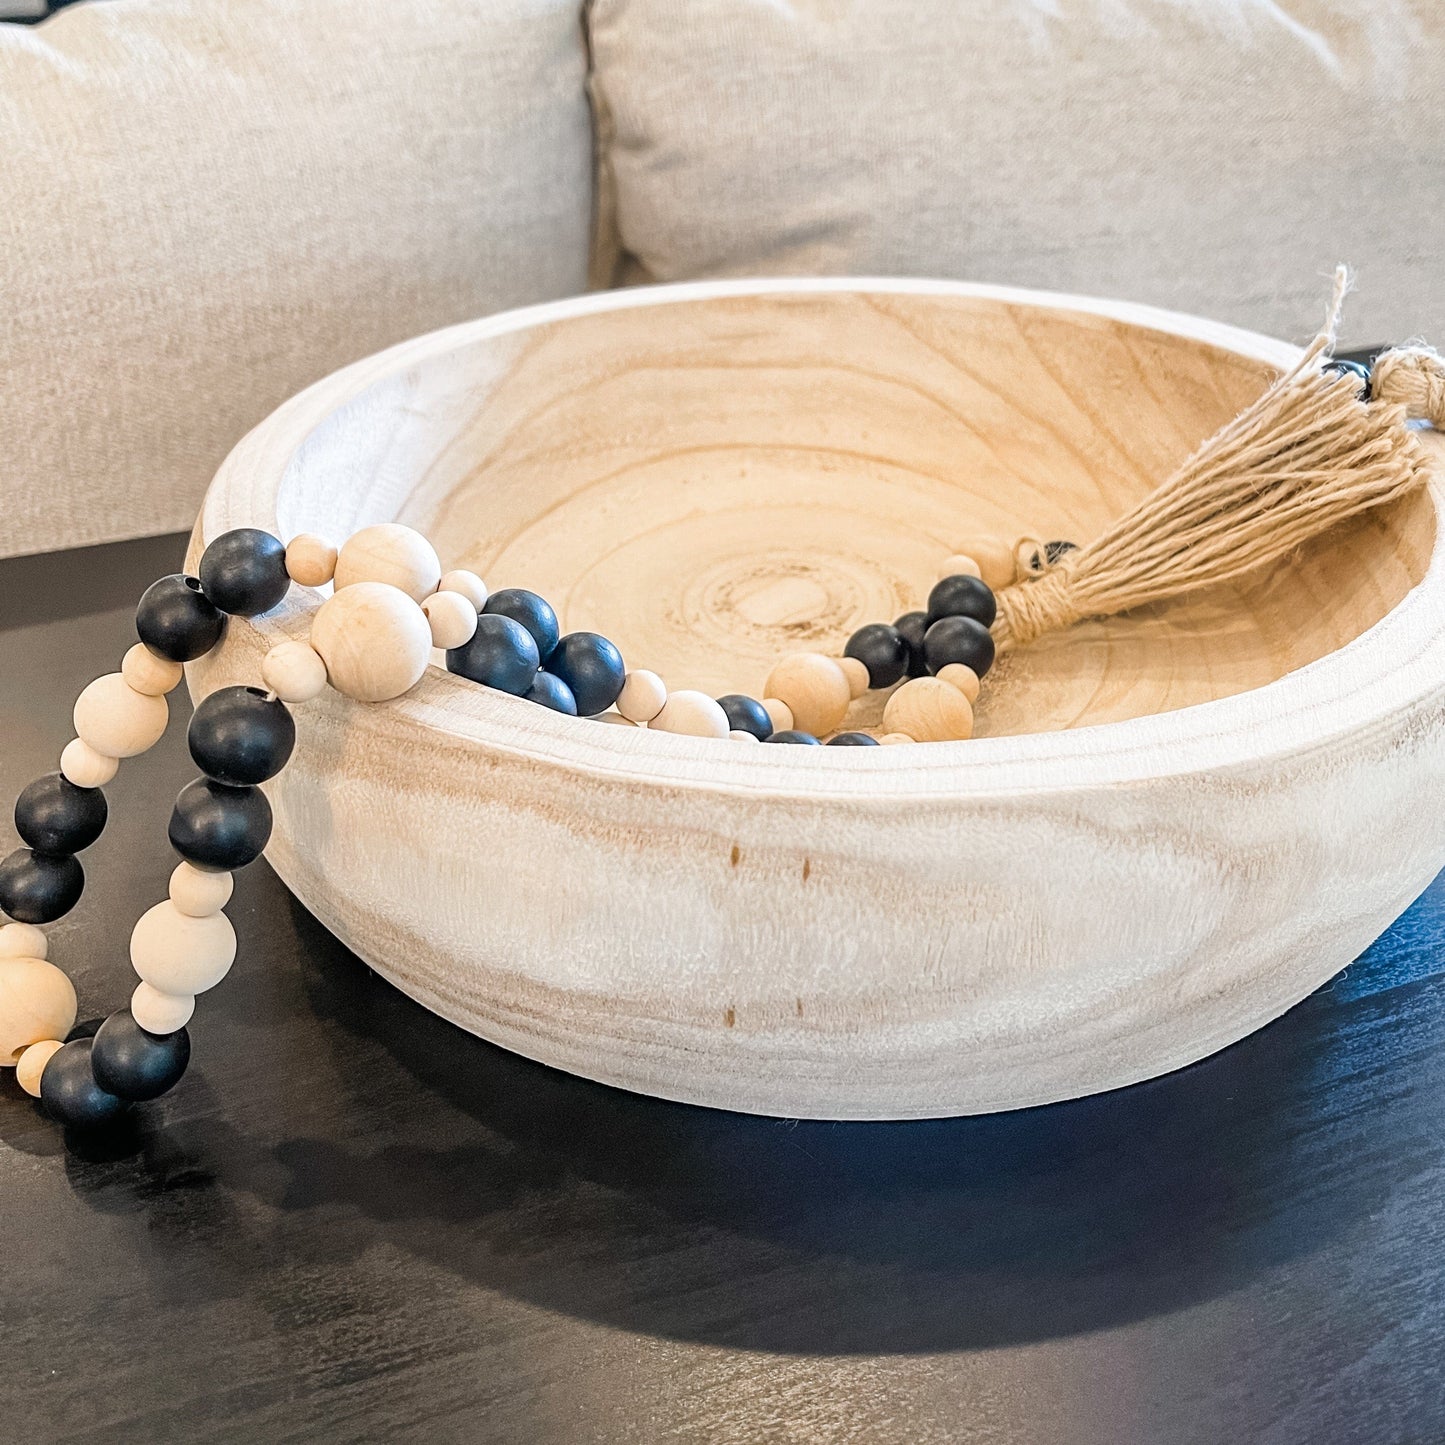 Hand-crafted Wooden Decor: Bowls Chains and Knots - bowl - 